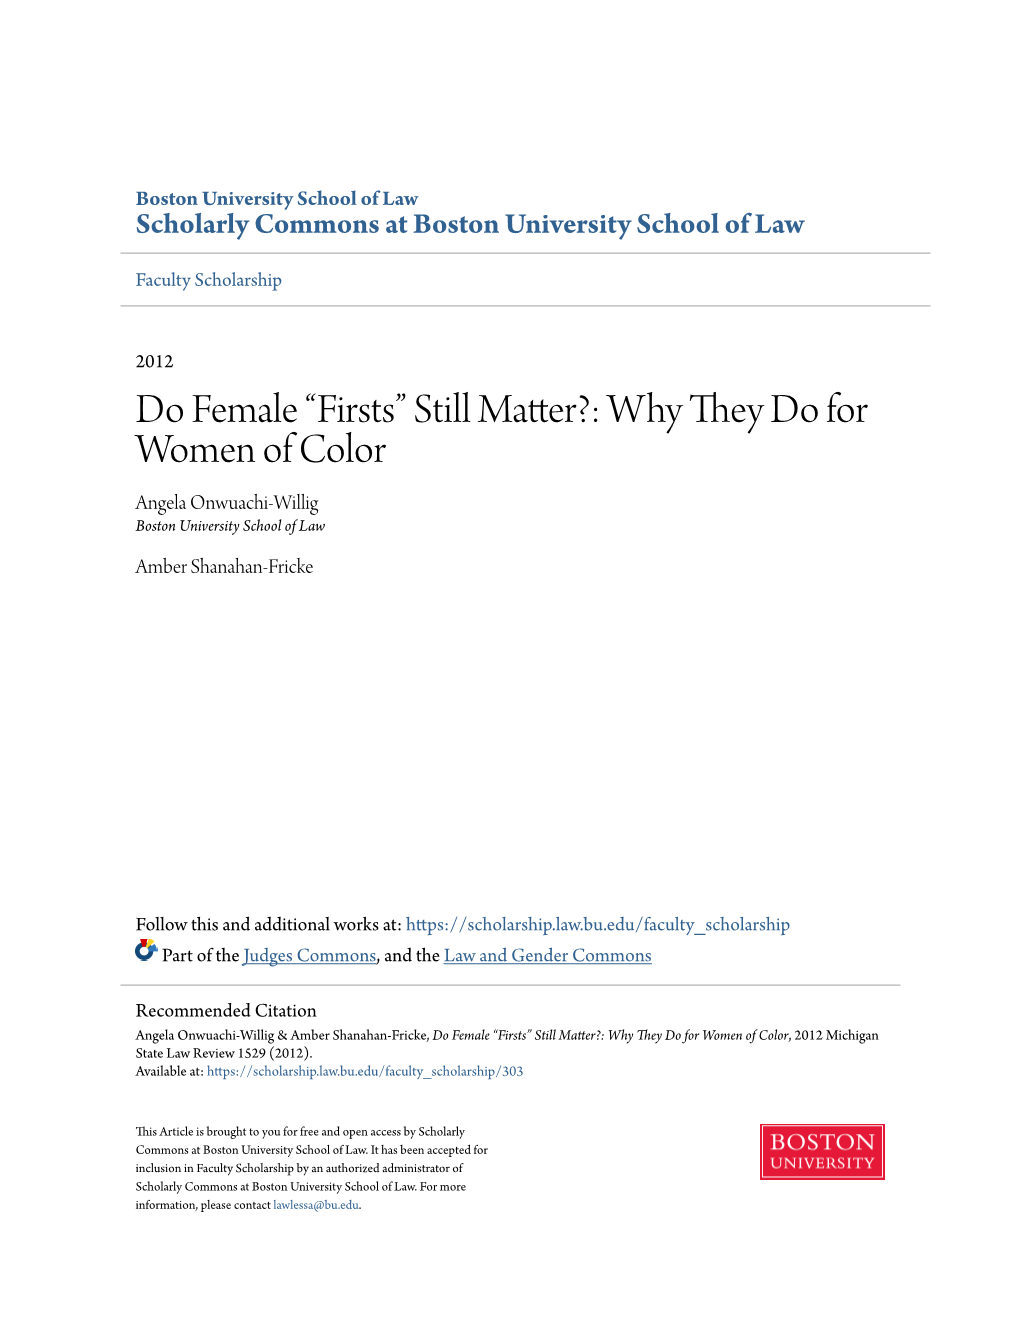 Do Female “Firsts” Still Matter?: Why They Do for Women of Color Angela Onwuachi-Willig Boston University School of Law